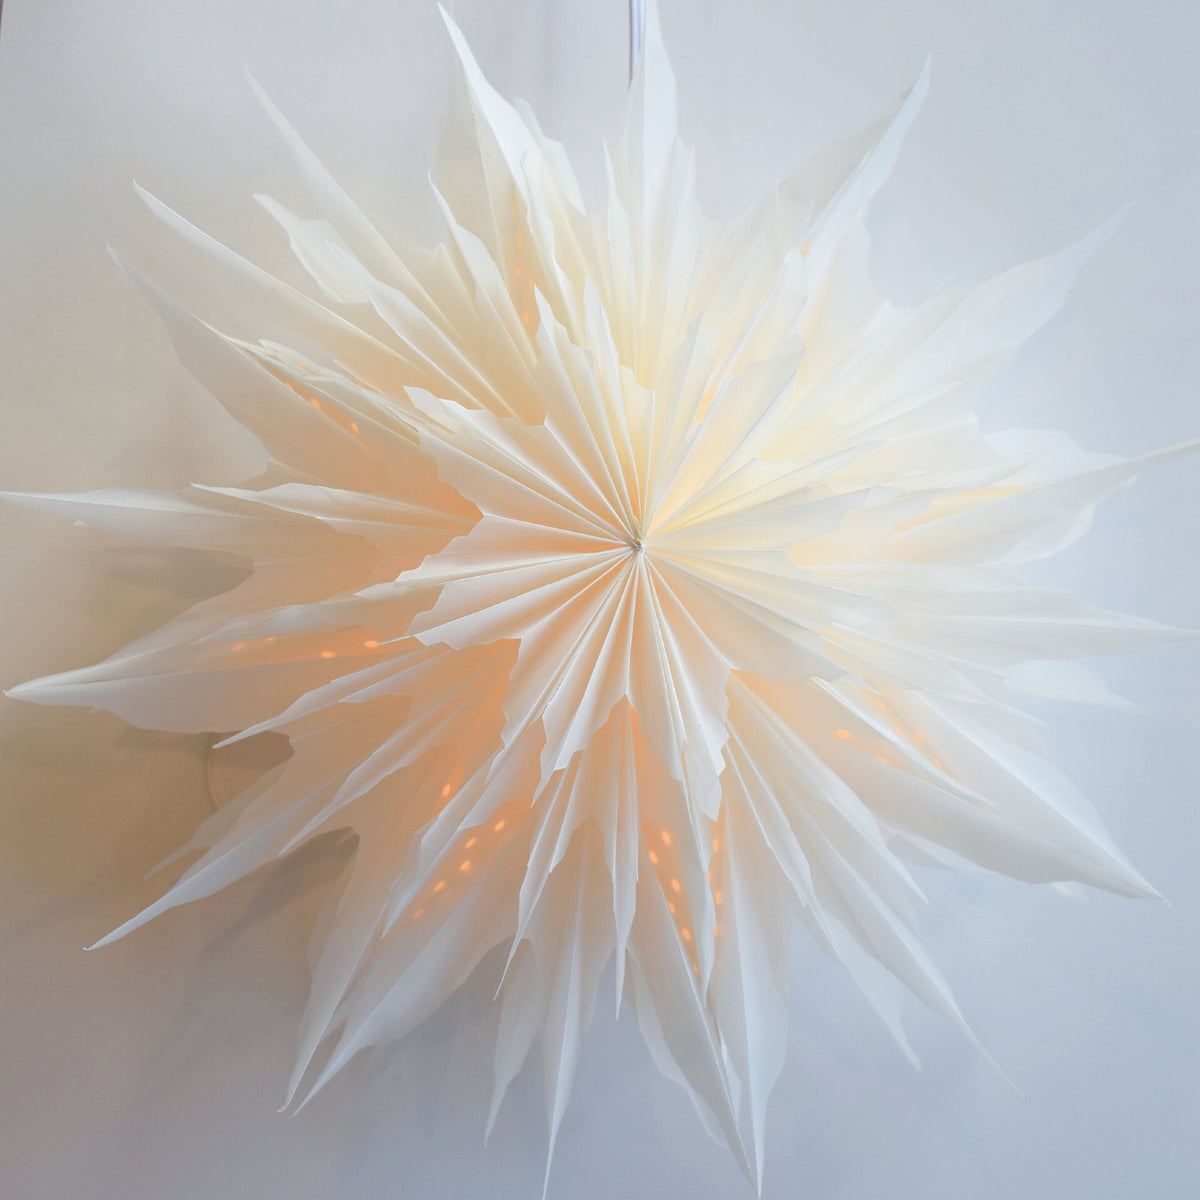 24&quot; White Snowdrift Snowflake Star Lantern Pizzelle Design - Great With or Without Lights - Ideal for Holiday and Snowflake Decorations, Weddings, Parties, and Home Decor